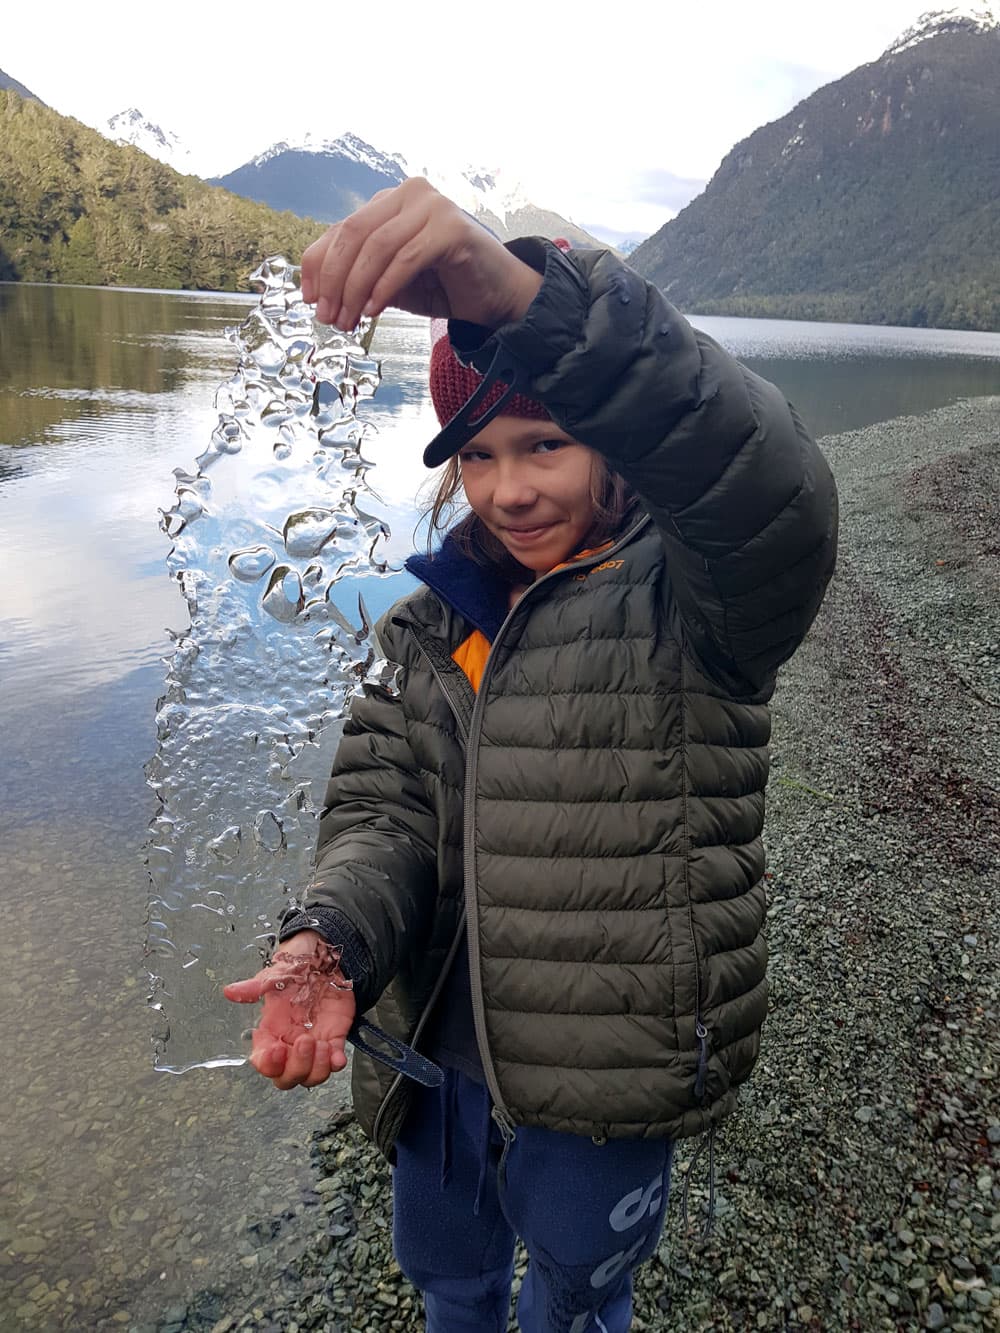 Fiordland Tours guests playing with ice from the lake